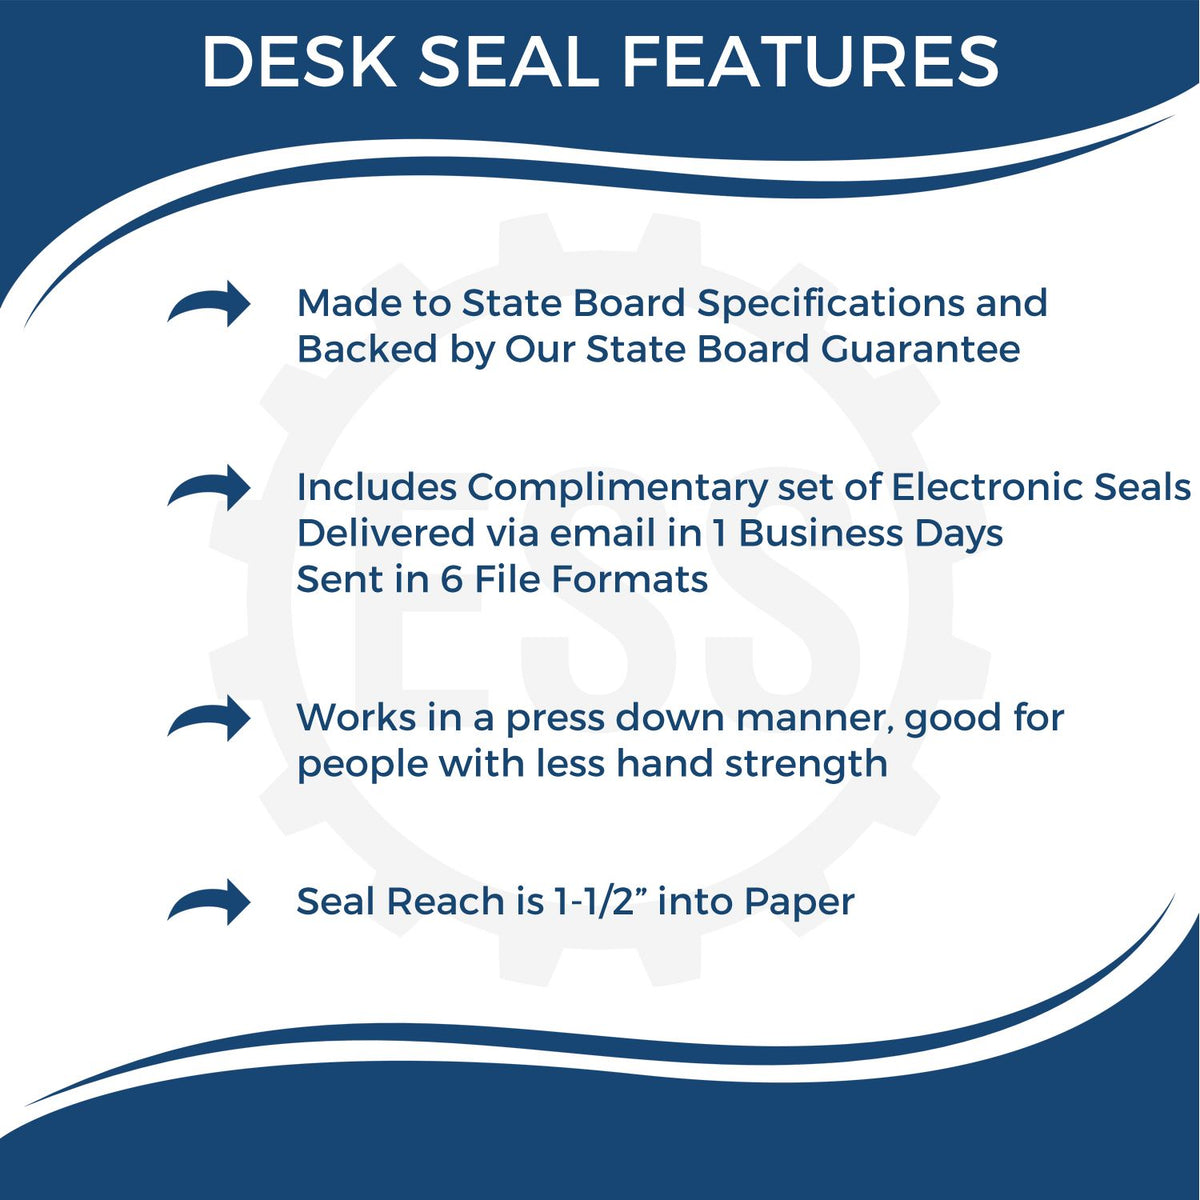 A picture of an infographic highlighting the selling points for the Montana Desk Surveyor Seal Embosser